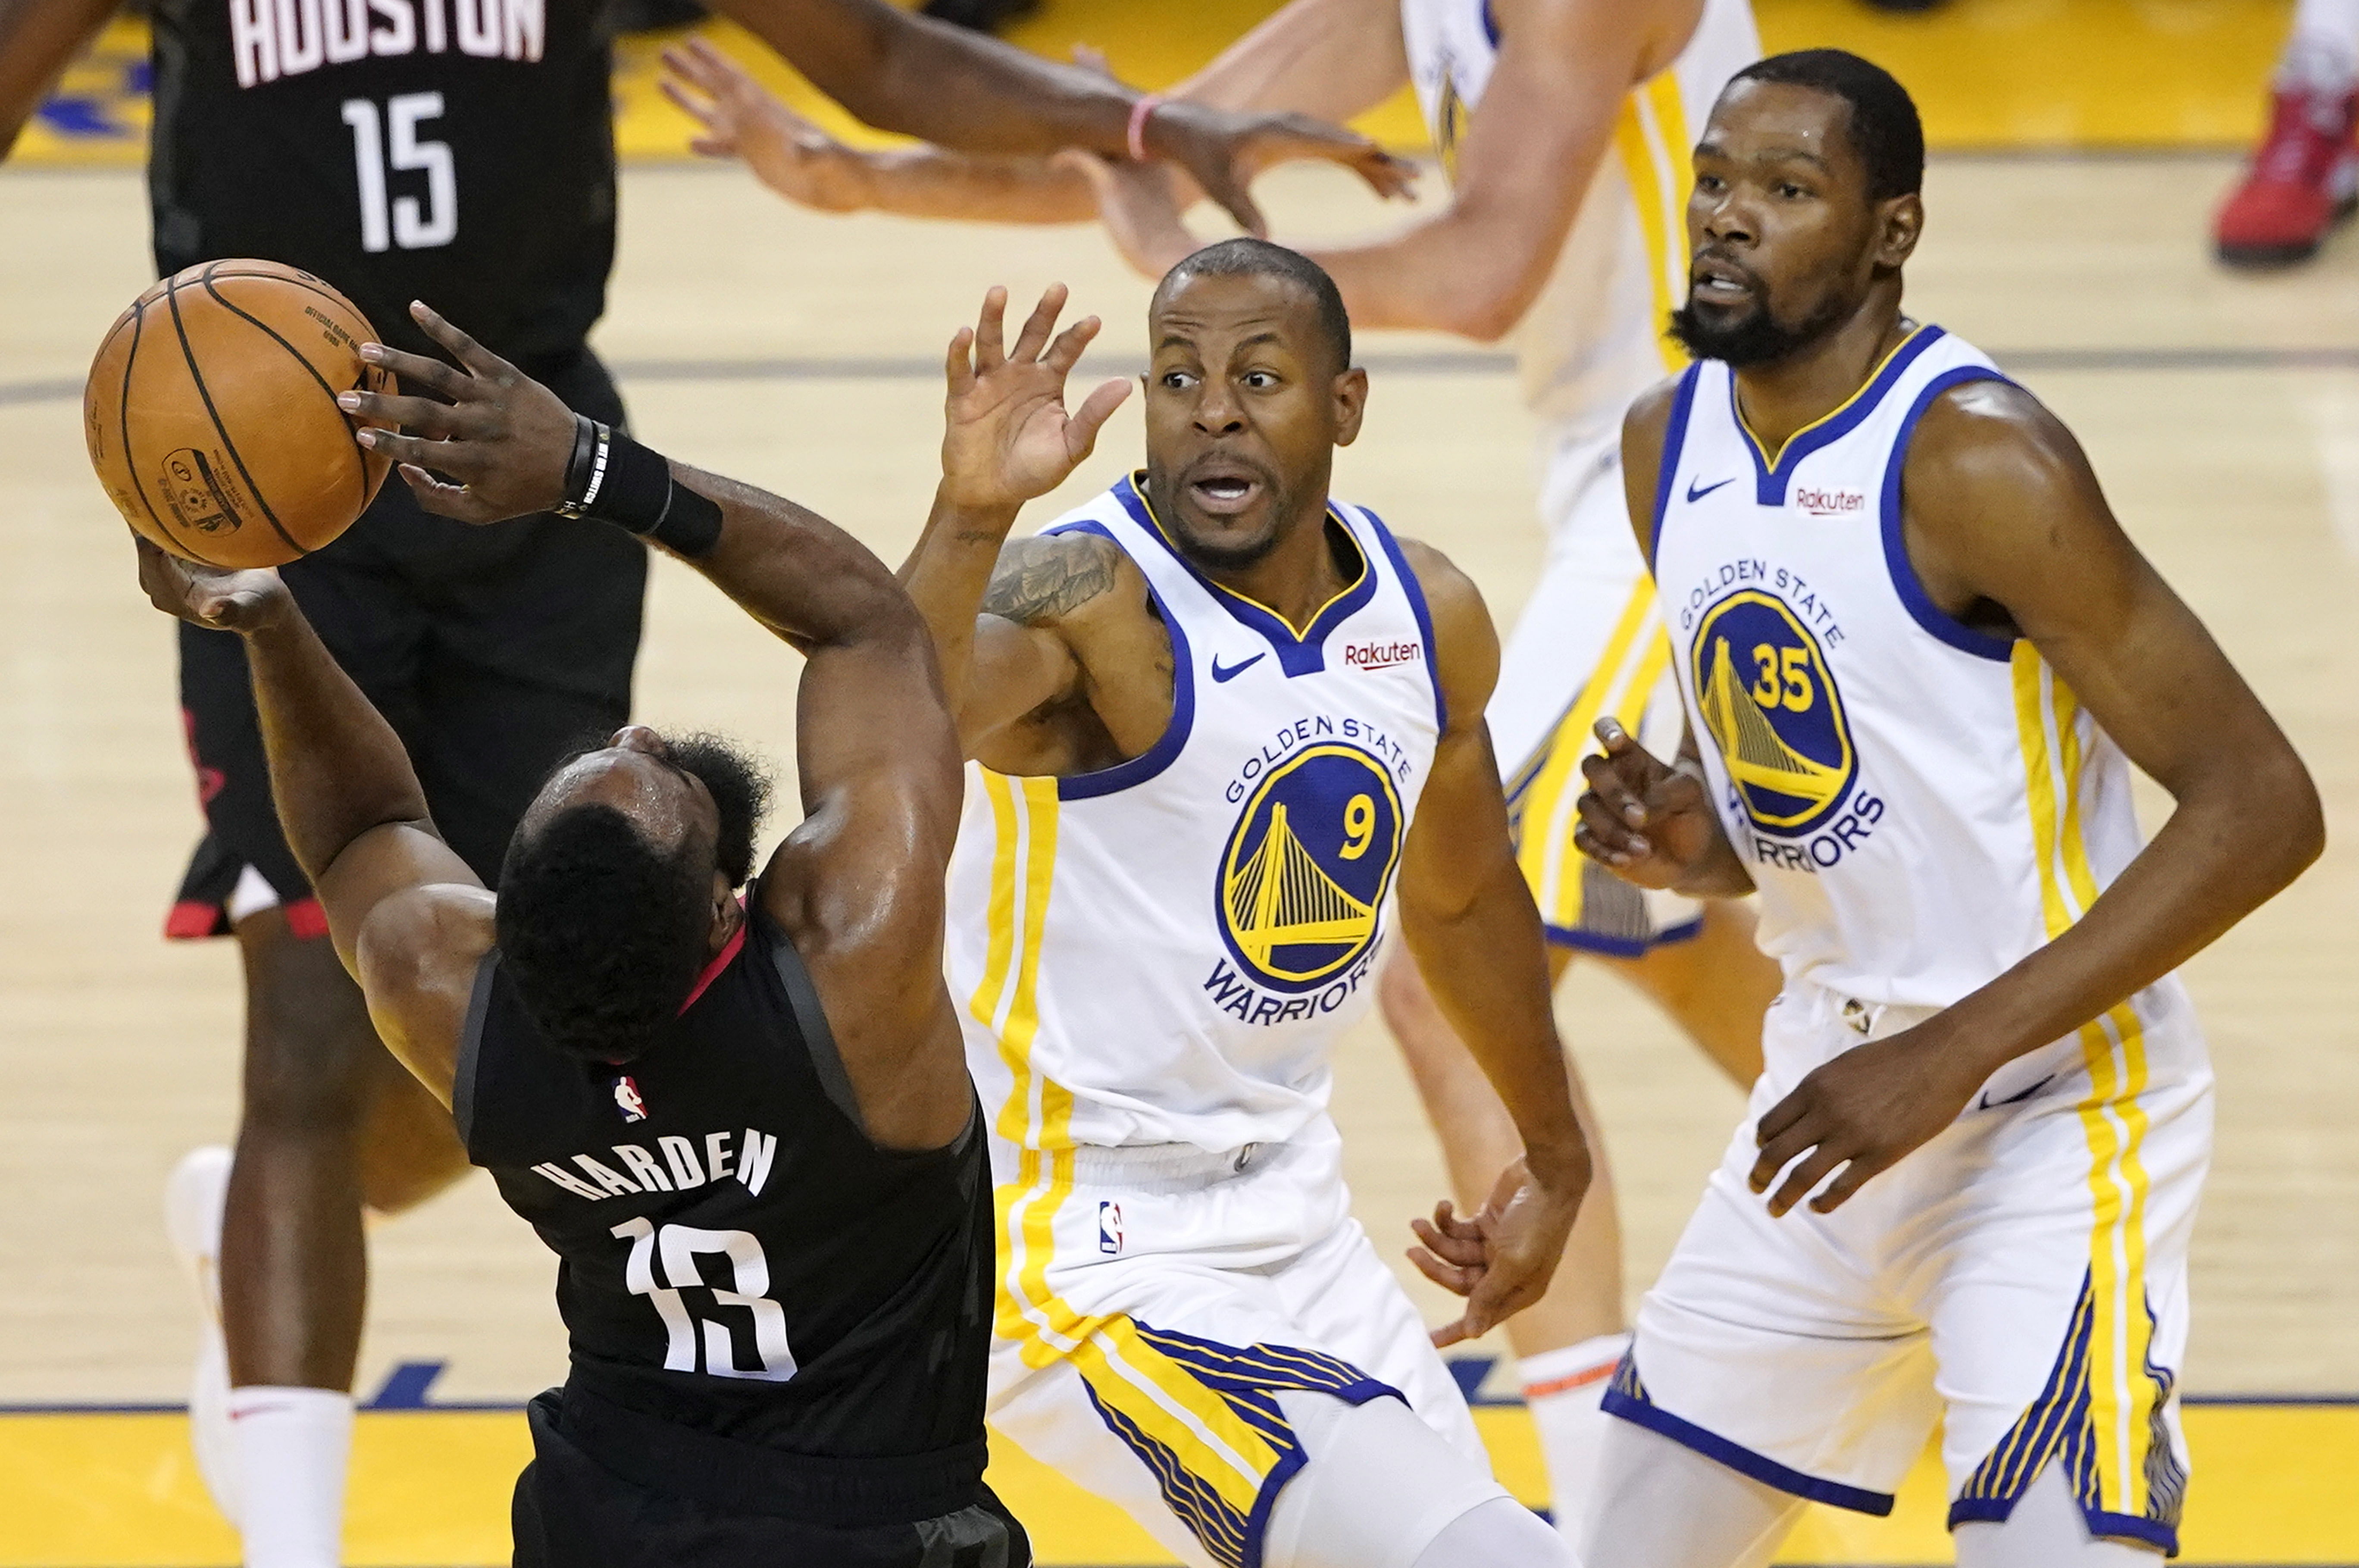 epa07535330 Houston Rockets guard James Harden (L) shoots while drawing a foul by Golden State Warriors guard Andre Iguodala (C) as Golden State Warriors forward Kevin Durant (R) looks on during the first half of the NBA Western Conference playoffs semifinals at Oracle Arena in Oakland, California, USA, 28 April 2019.  EPA/JOHN G. MABANGLO SHUTTERSTOCK OUT